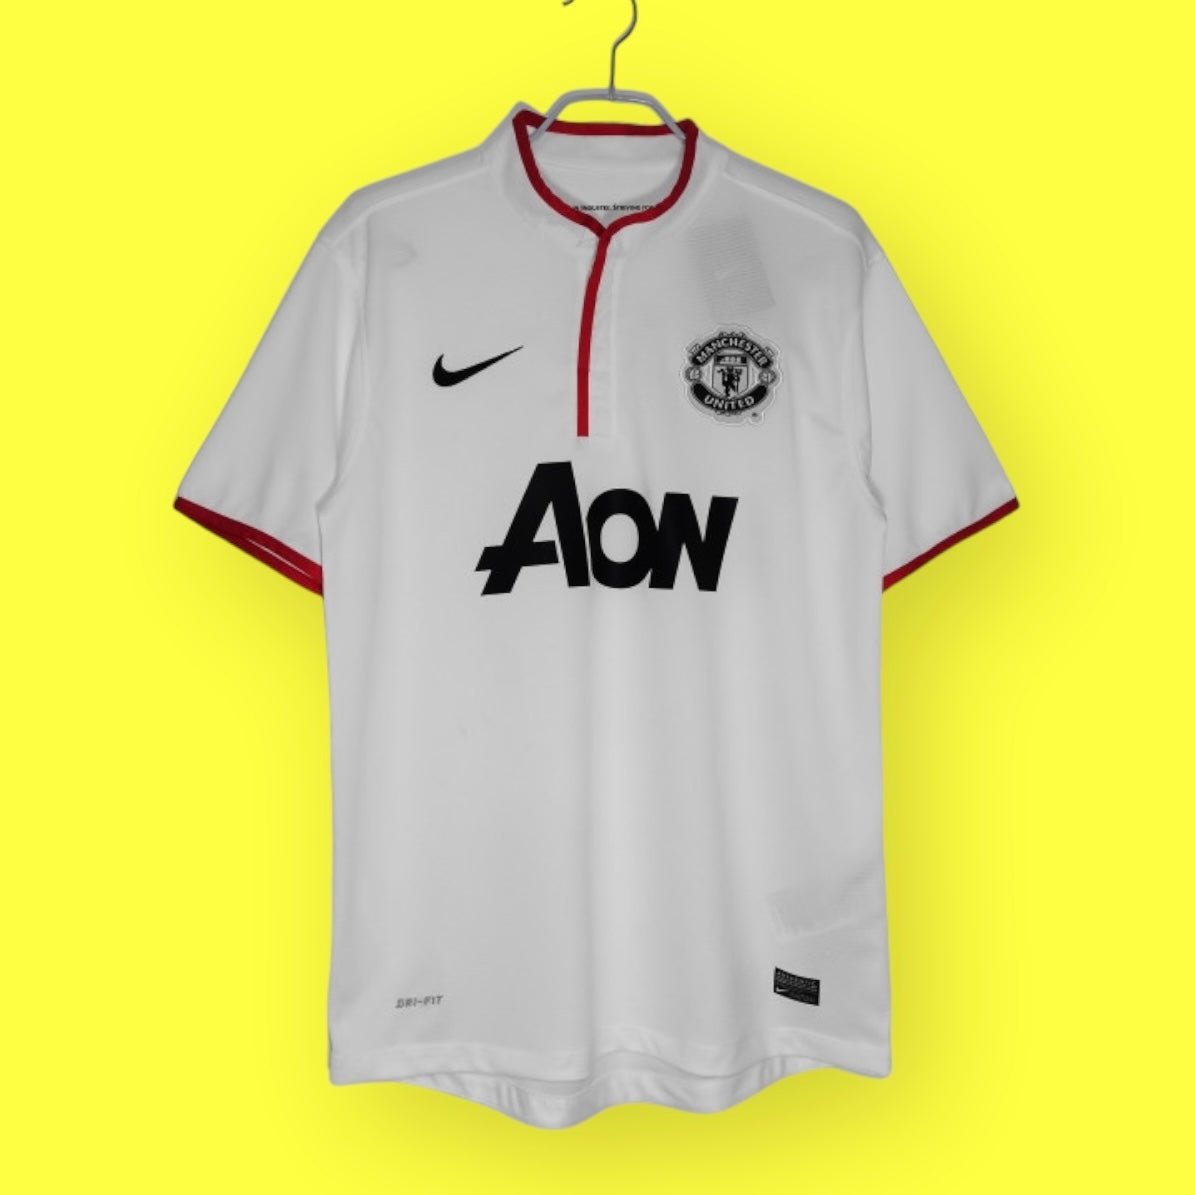 Manchester United Away 2012/13